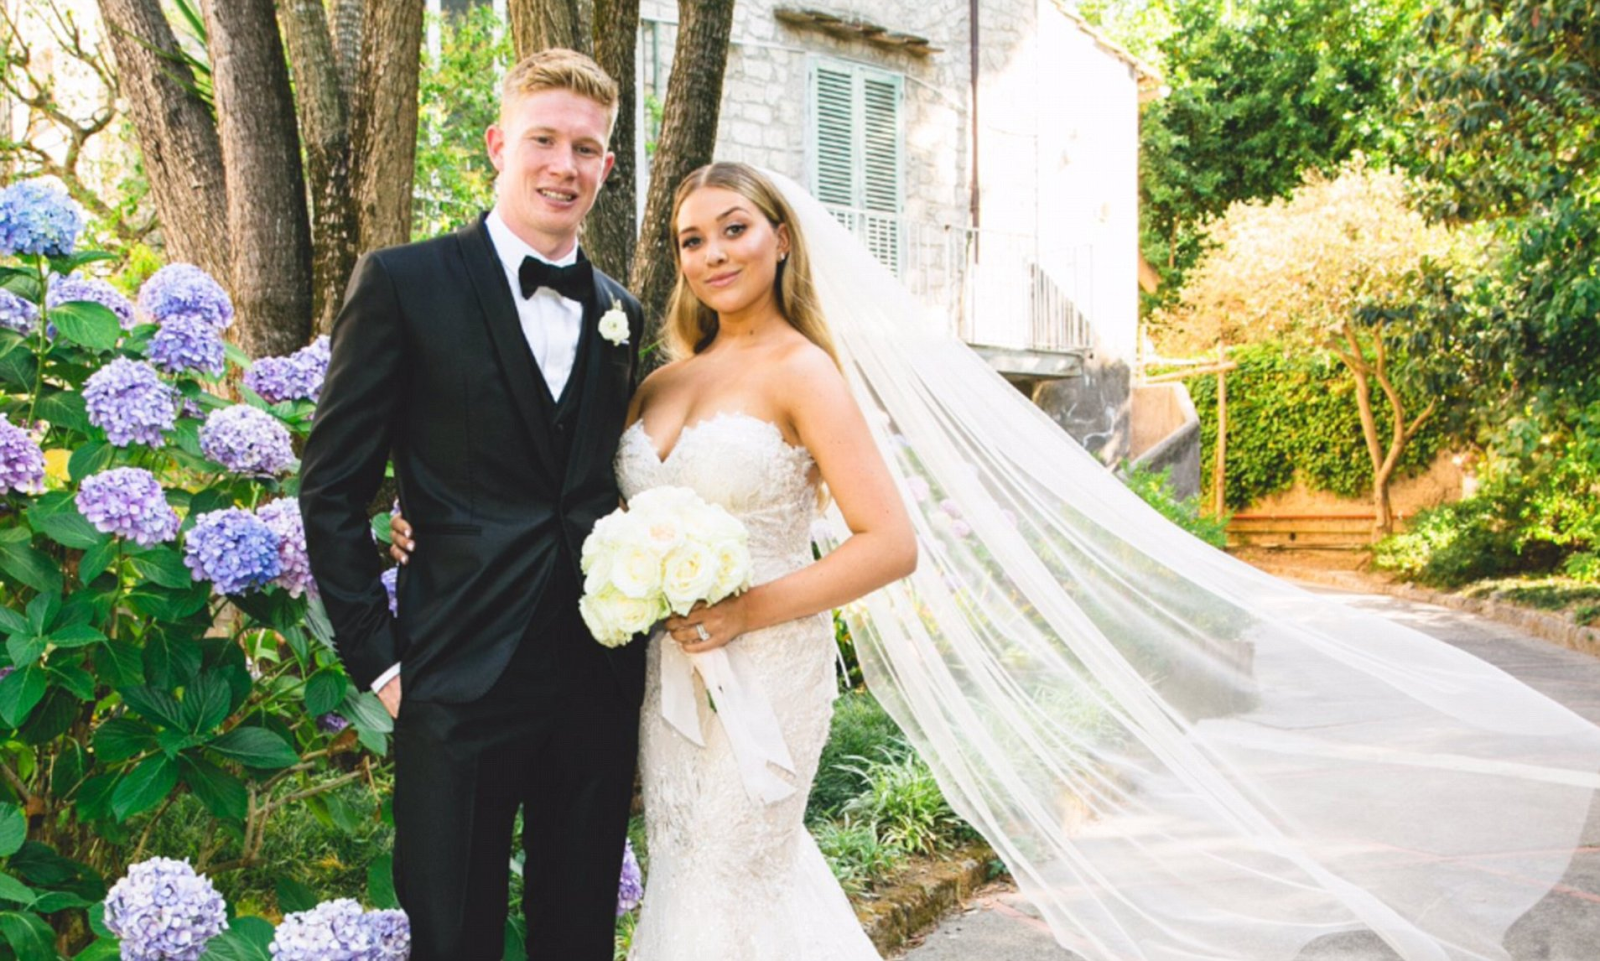 Kevin De Bruyne Family and Relationships